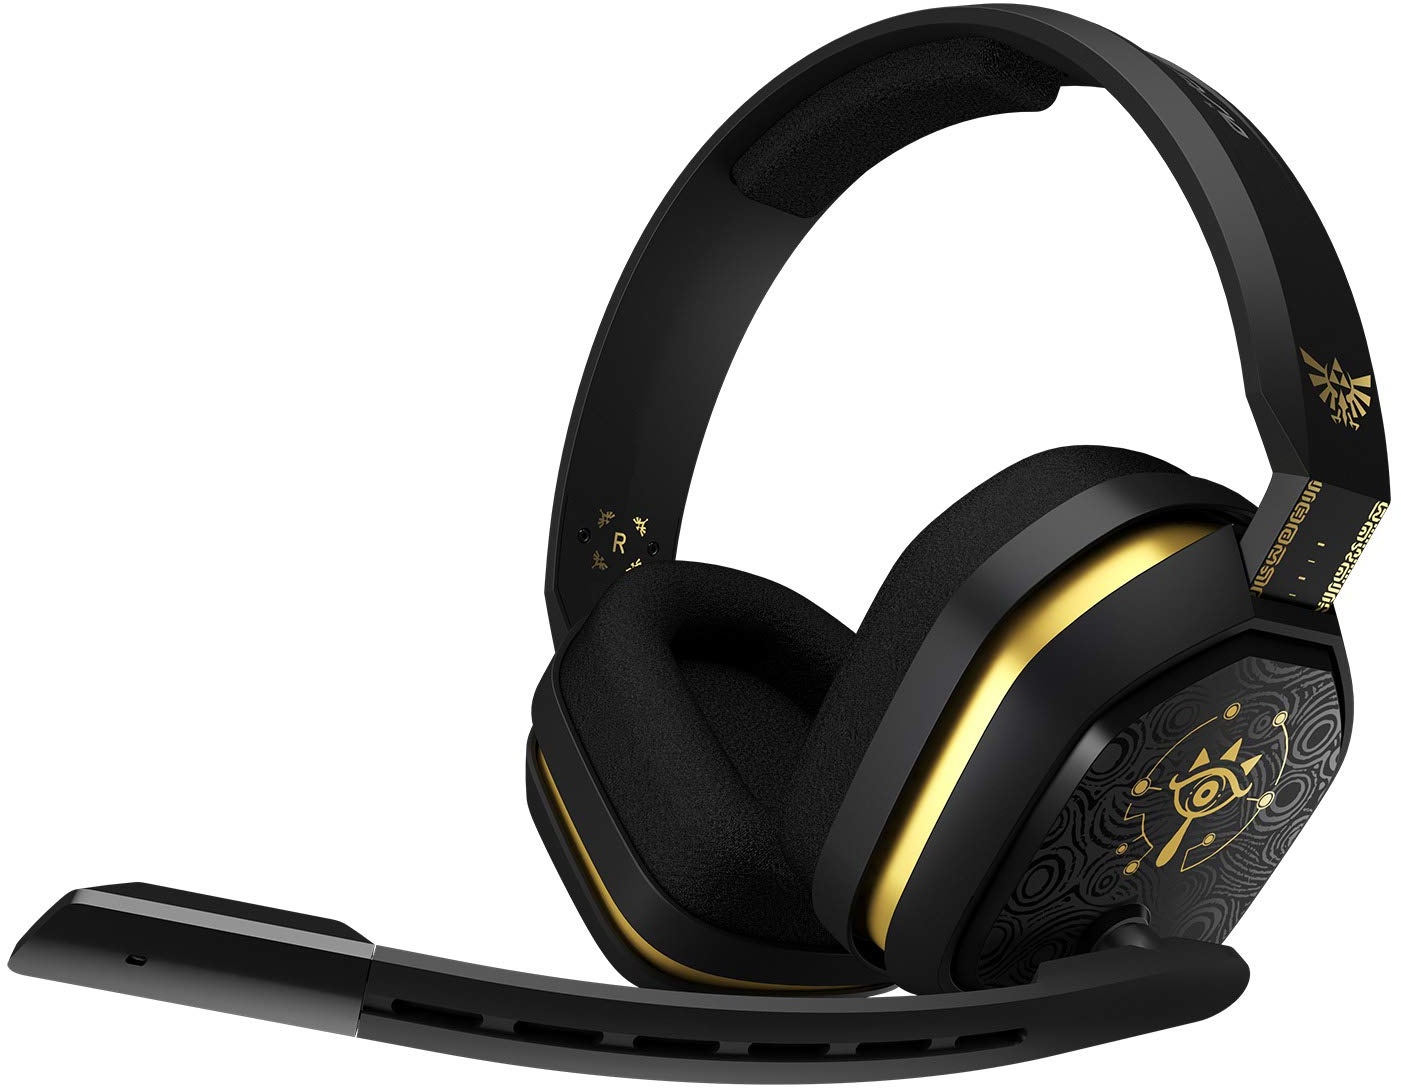 ASTRO Gaming A10 Gaming-Headset mit Kabel, Zelda Edition, Leicht & Robust, Dolby ATMOS, 3,5mm Anschluss, Xbox Series X|S, Xbox One, PS5, PS4, Nintendo Switch, PC, Mac, Smartphone - Schwarz/Gold